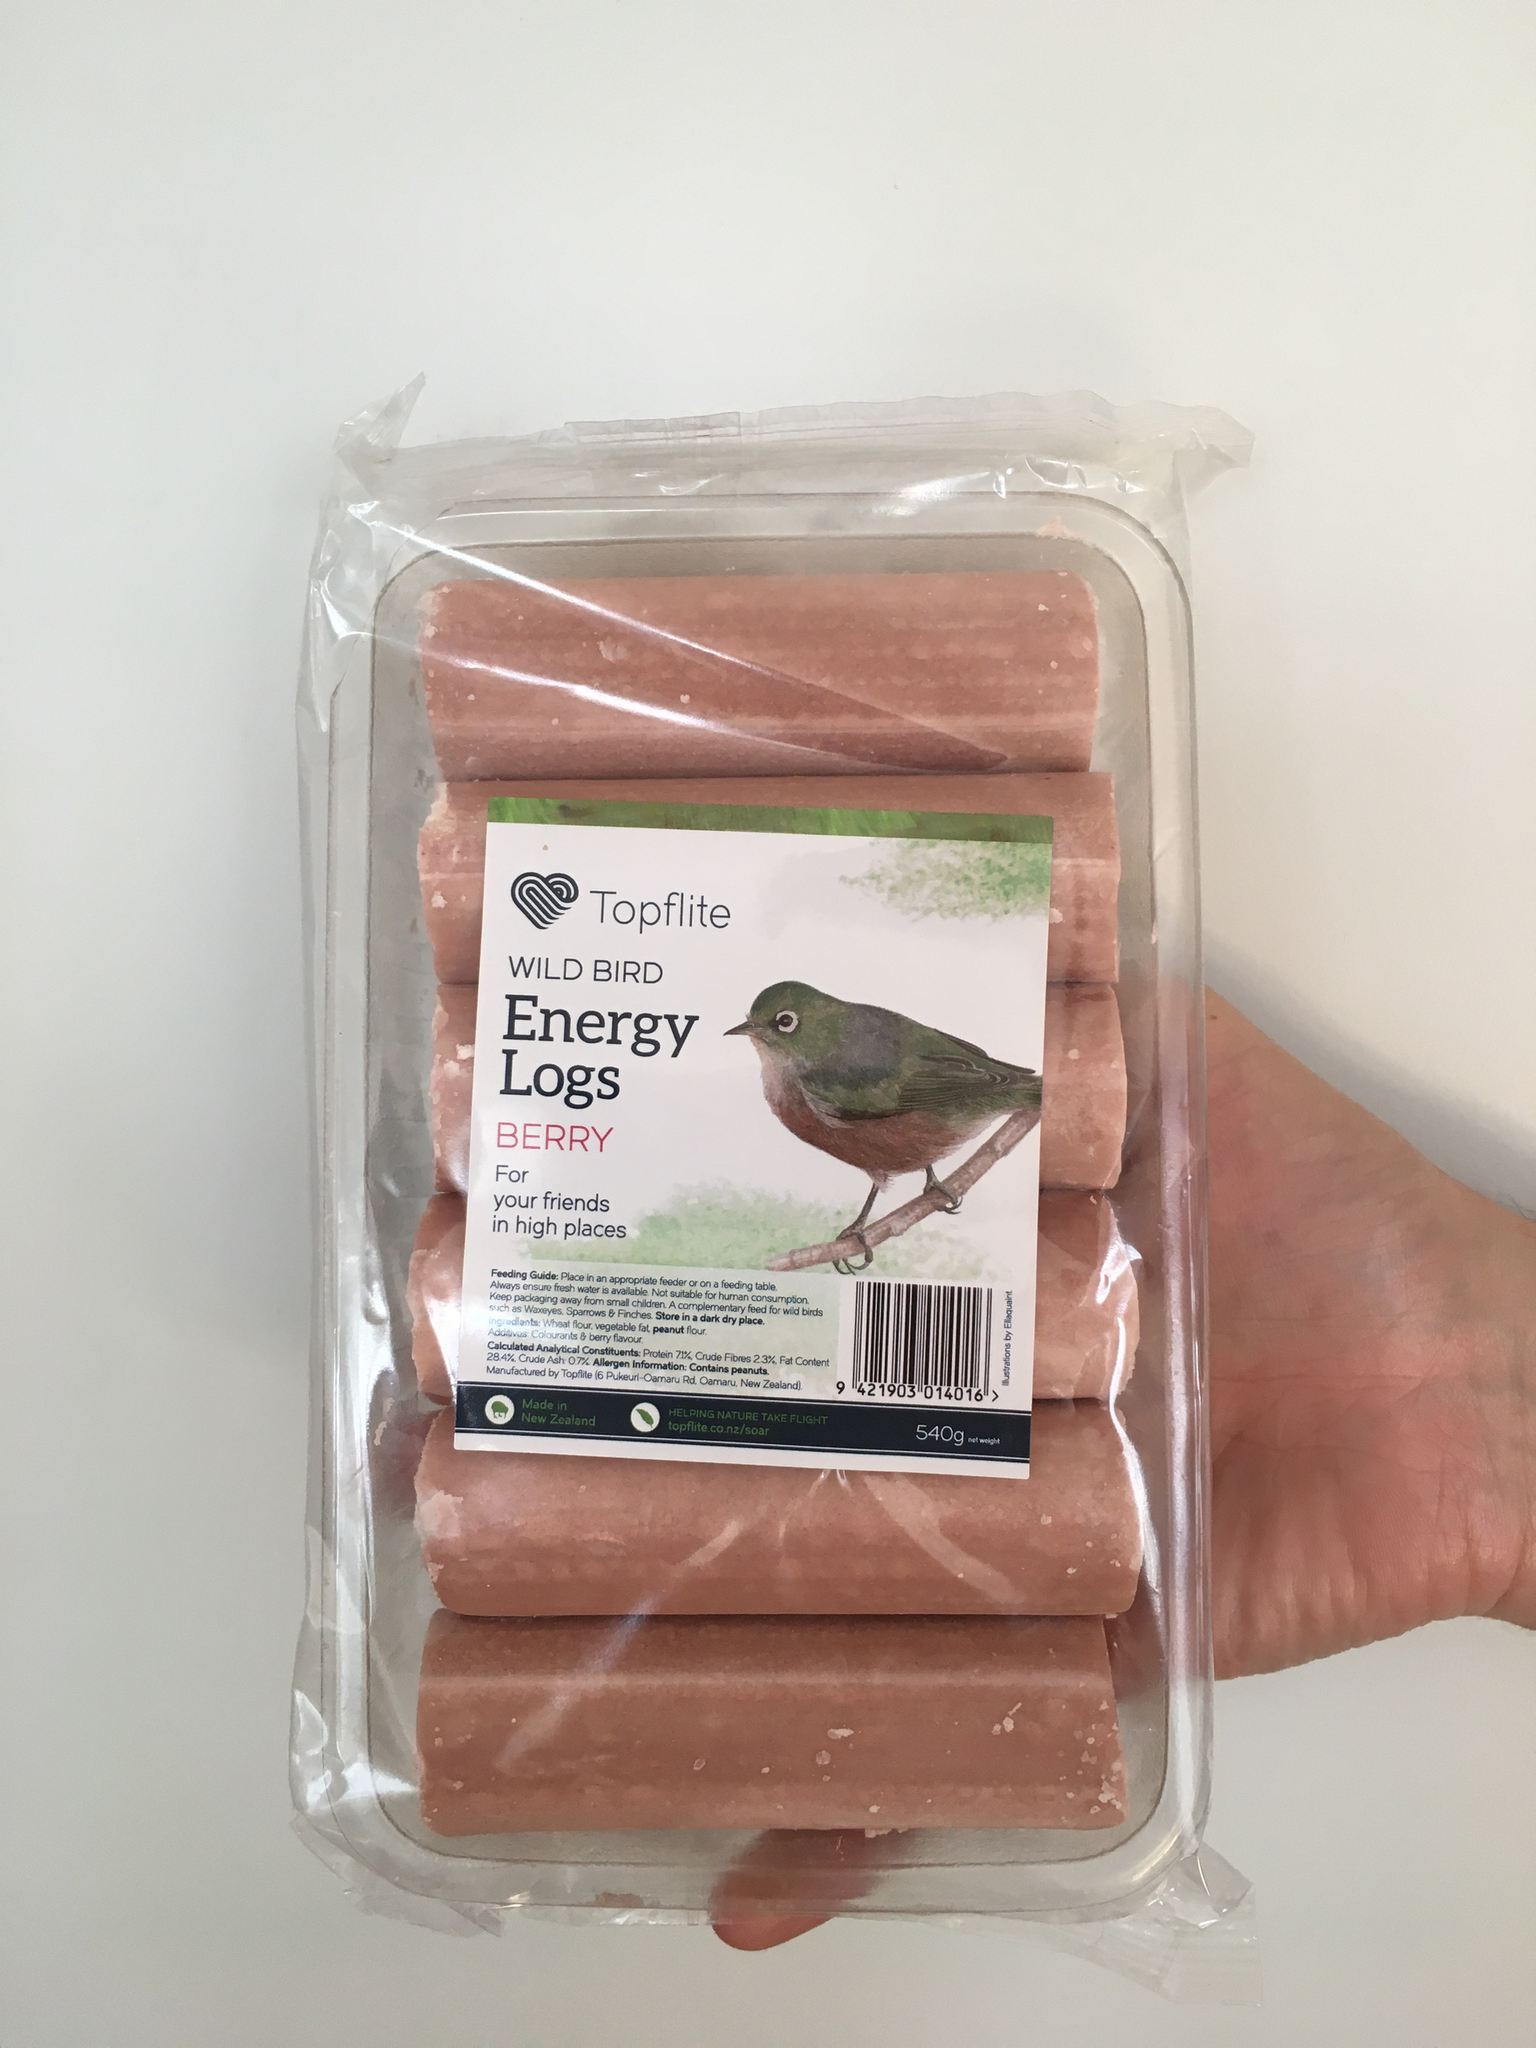 Energy logs for wild birds, berry flavour, pictured with a photo of tauhou, silvereye, wax-eye bird.